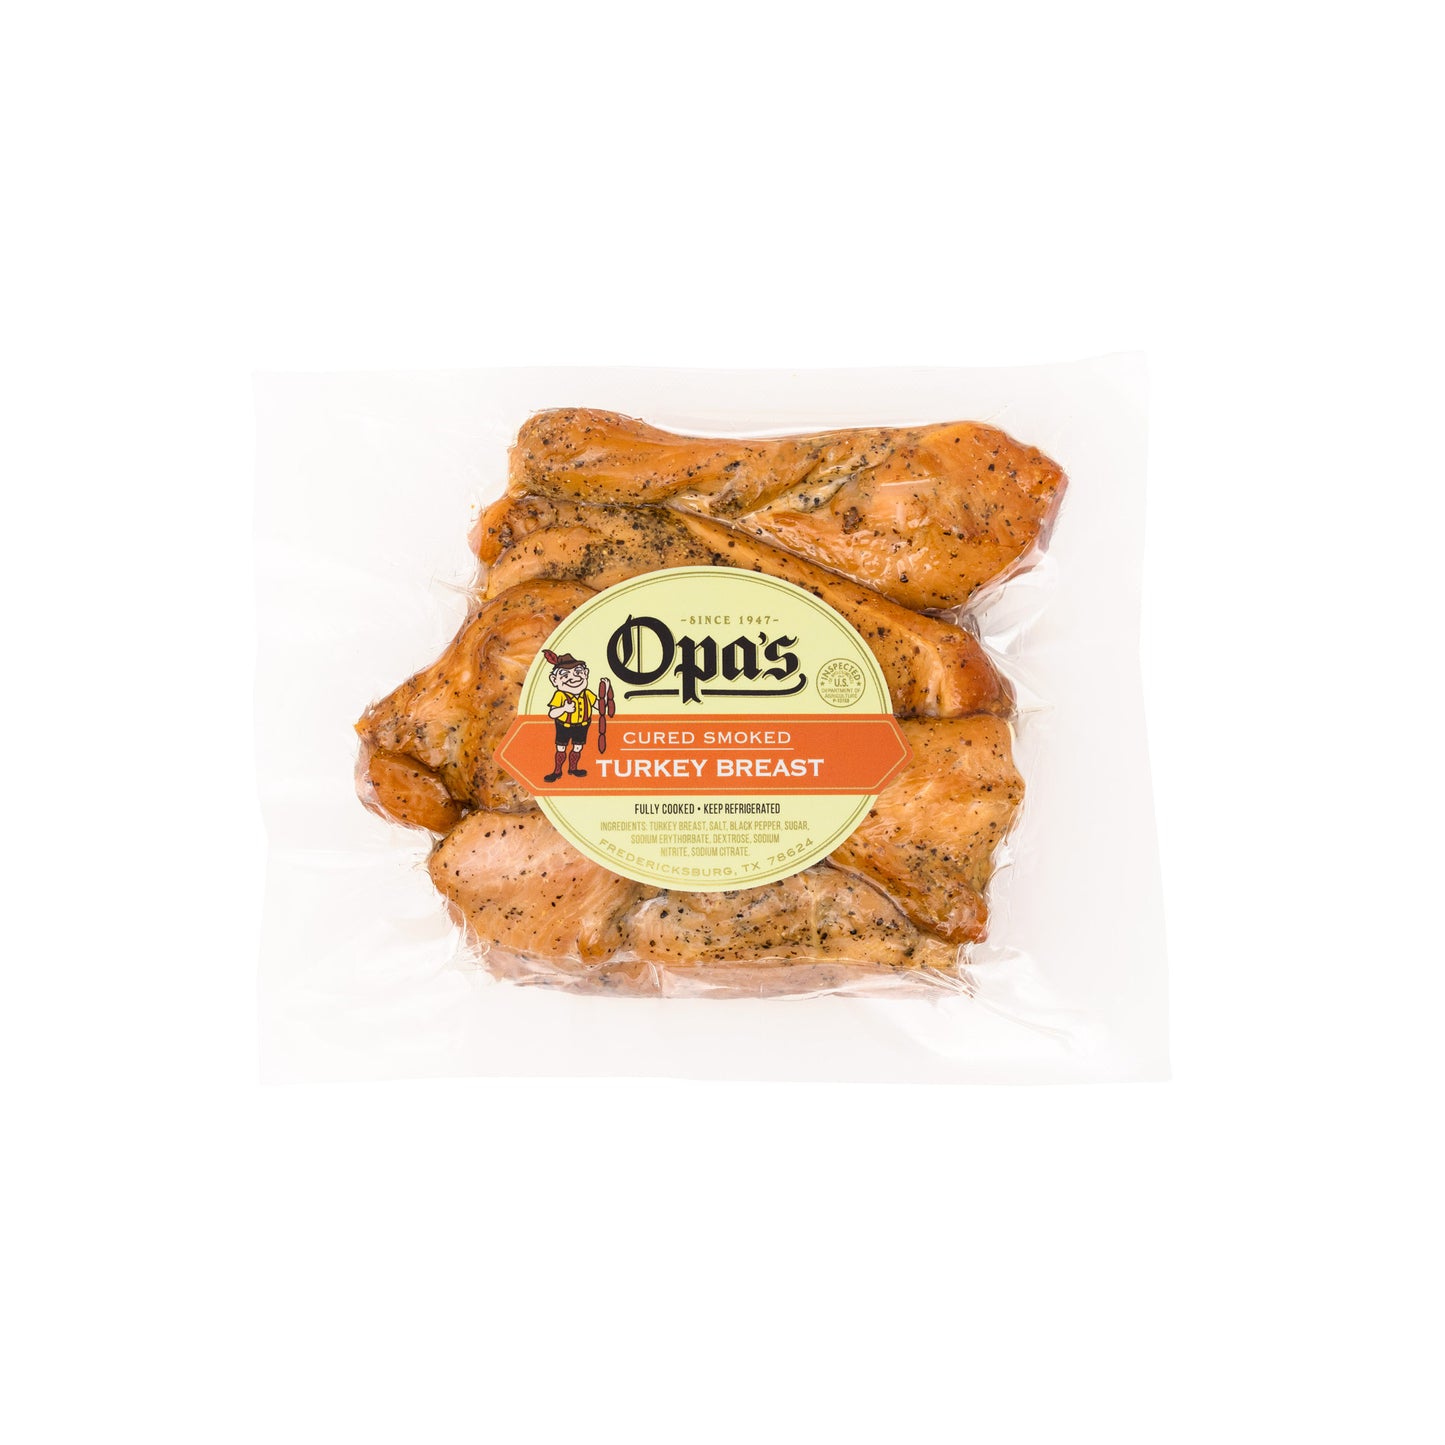 Opa's Peppered Cured Smoked Turkey Breast